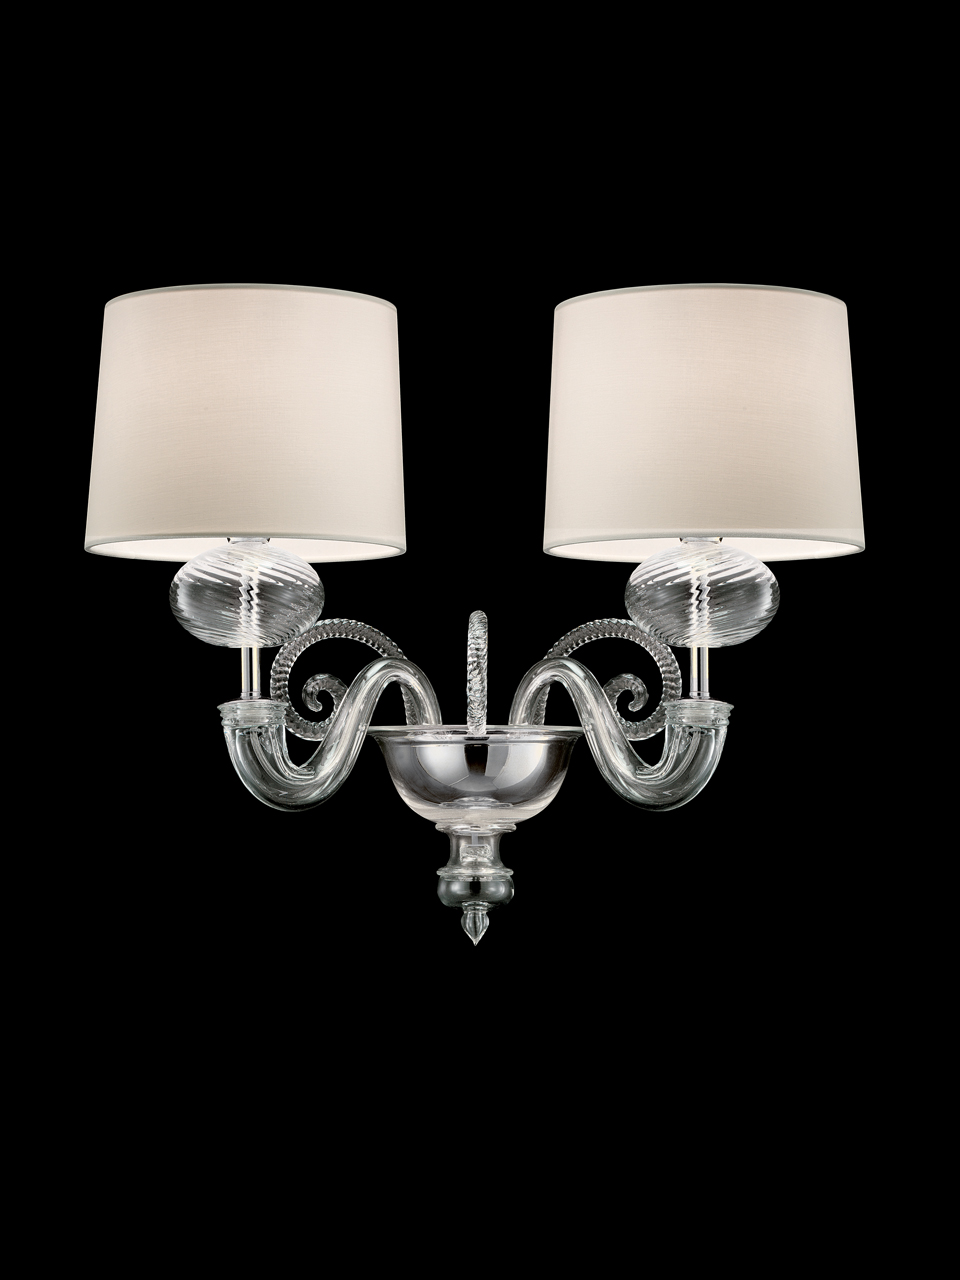 Tangeri classic wall lamp in crystal and chrome metal 2 lights. Barovier&Toso. 